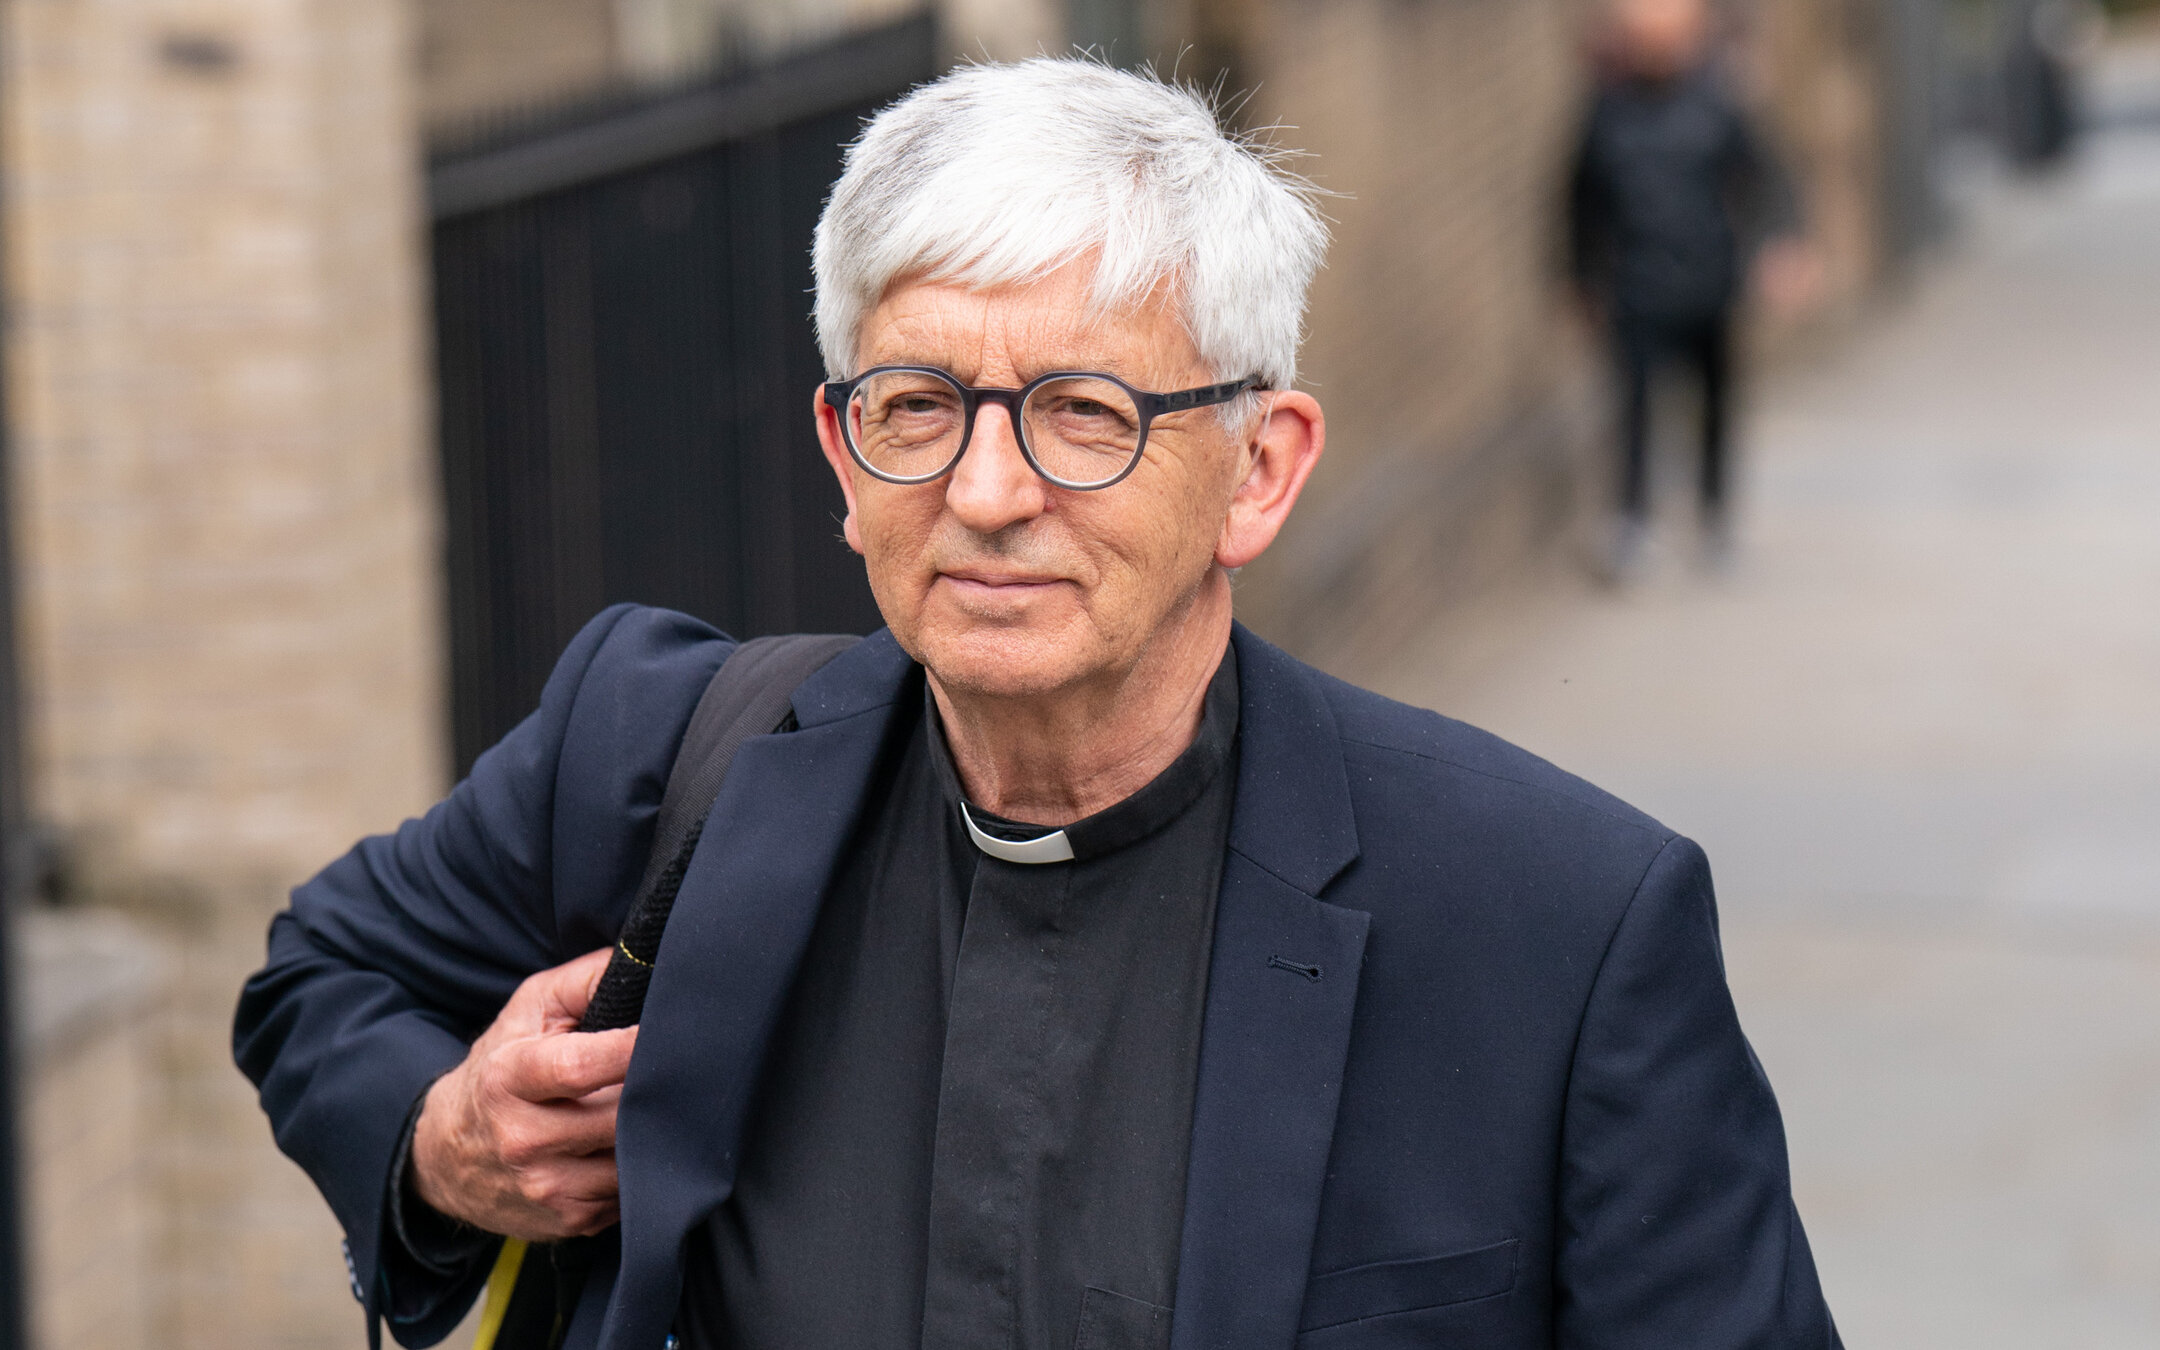 Rev. Stephen Sizer leaves a disciplinary tribunal at St. Andrew’s Courtroom, in central London, May 23, 2022. (Dominic Lipinski/PA Images via Getty Images)